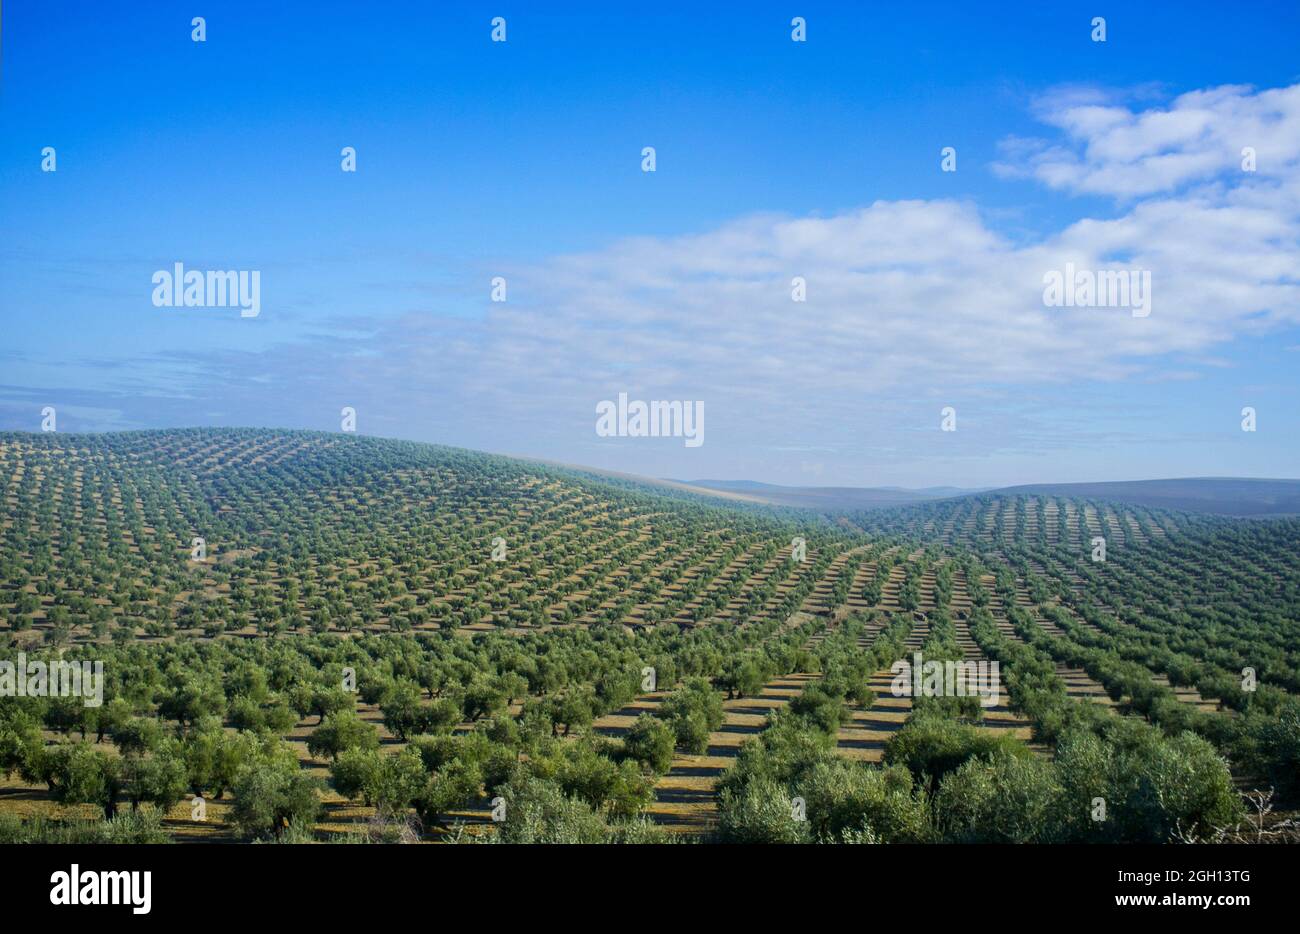 Vast olive trees fields of South Spain, Jaen Province. Stock Photo